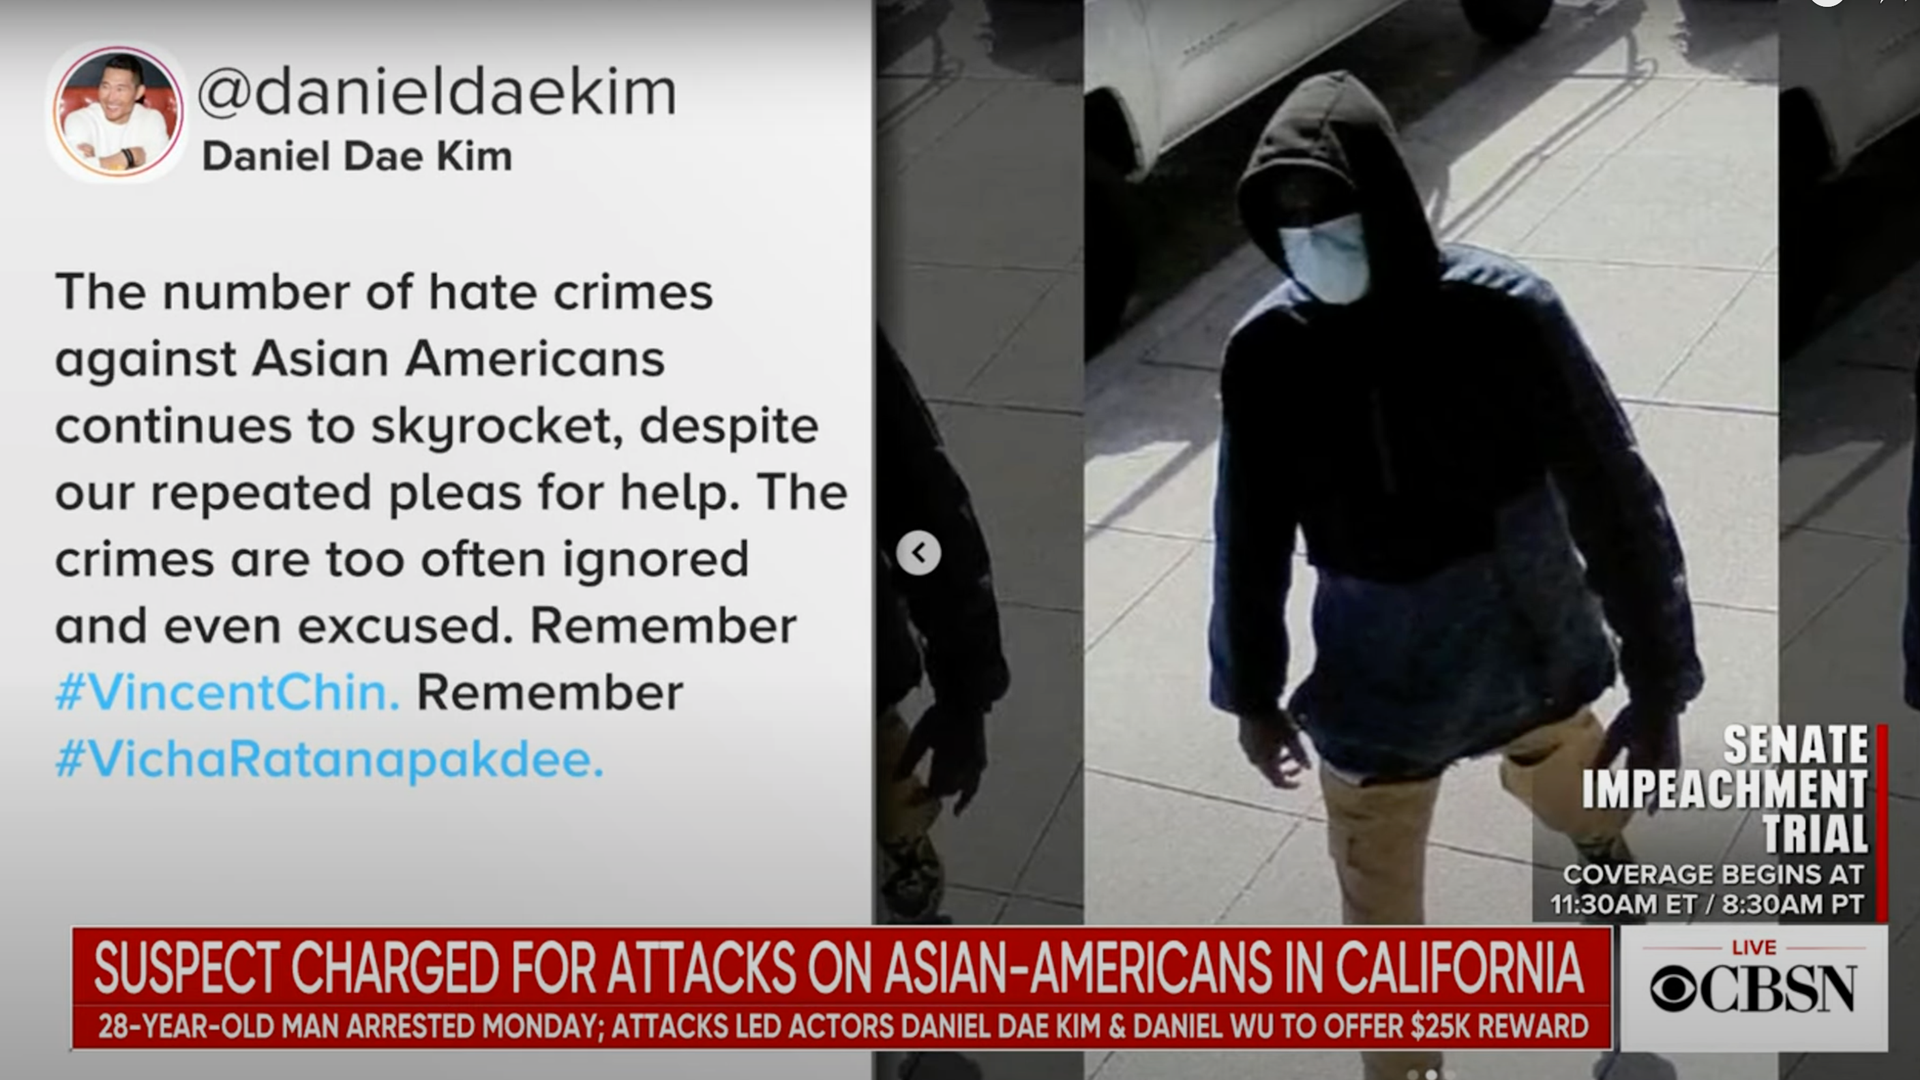 Screengrab of a CBS News package with Daniel Dae Kim's tweet on the left and footage of a suspect on the right